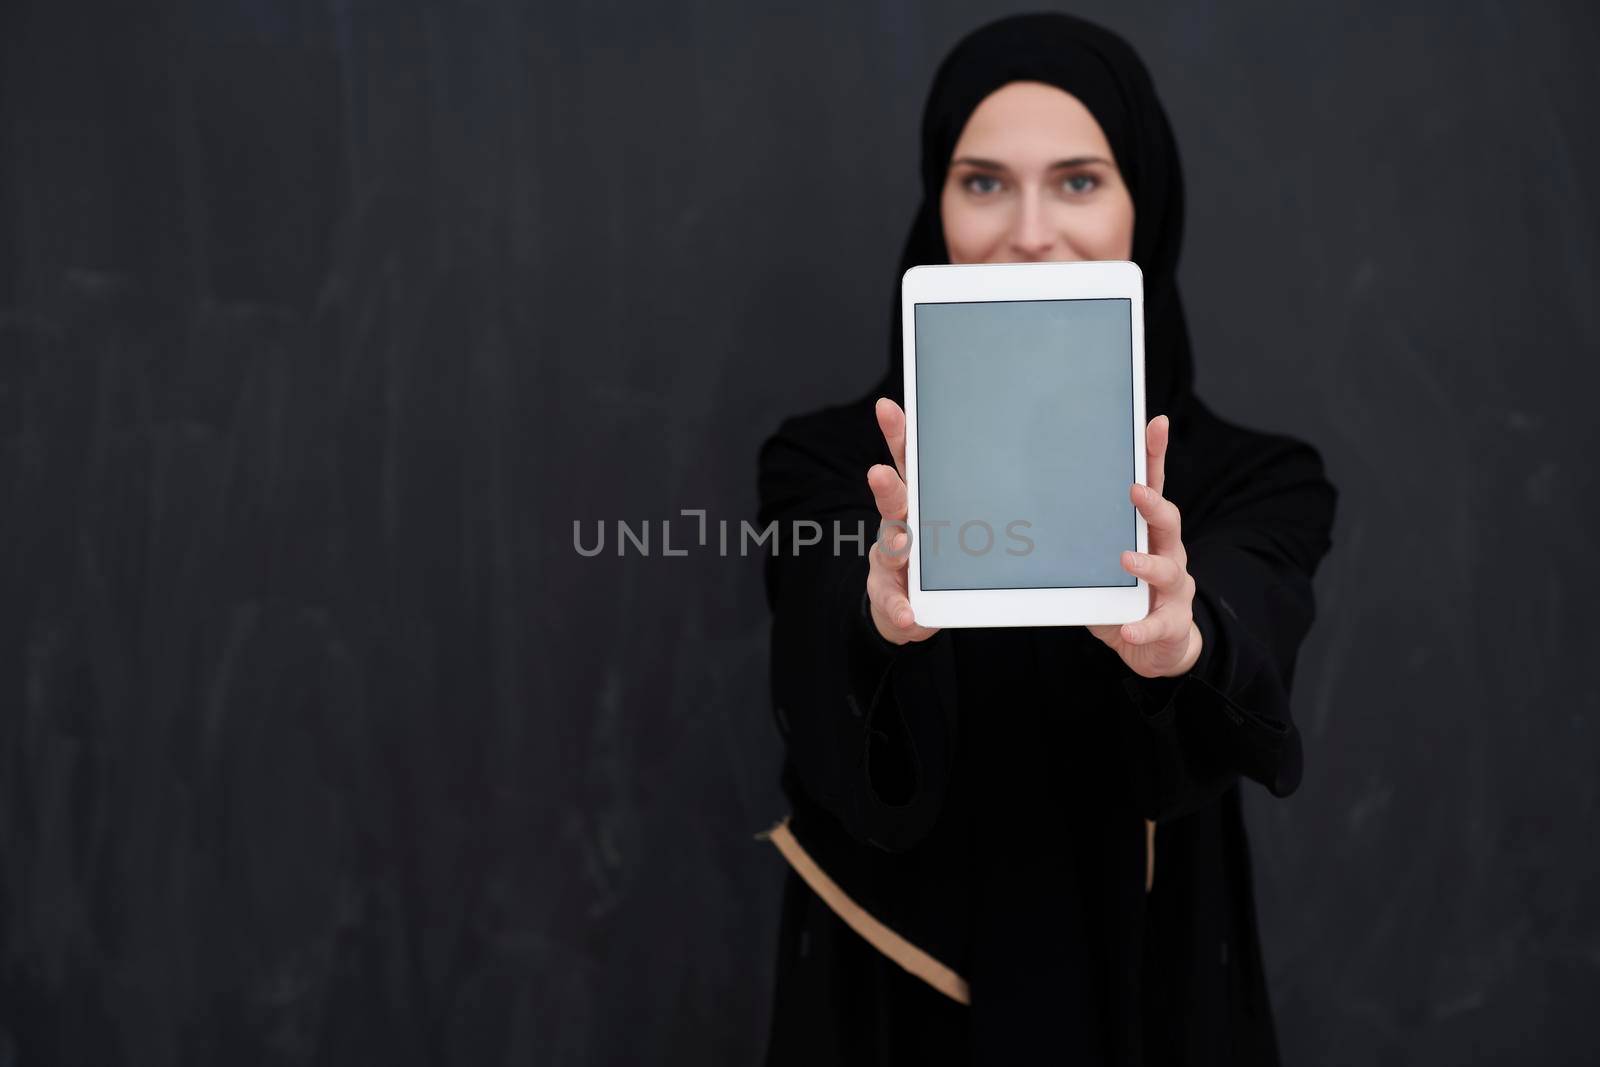 Young Arab businesswoman in traditional clothes or abaya and glasses holding tablet computer in front of black chalkboard representing modern islam fashion and technology